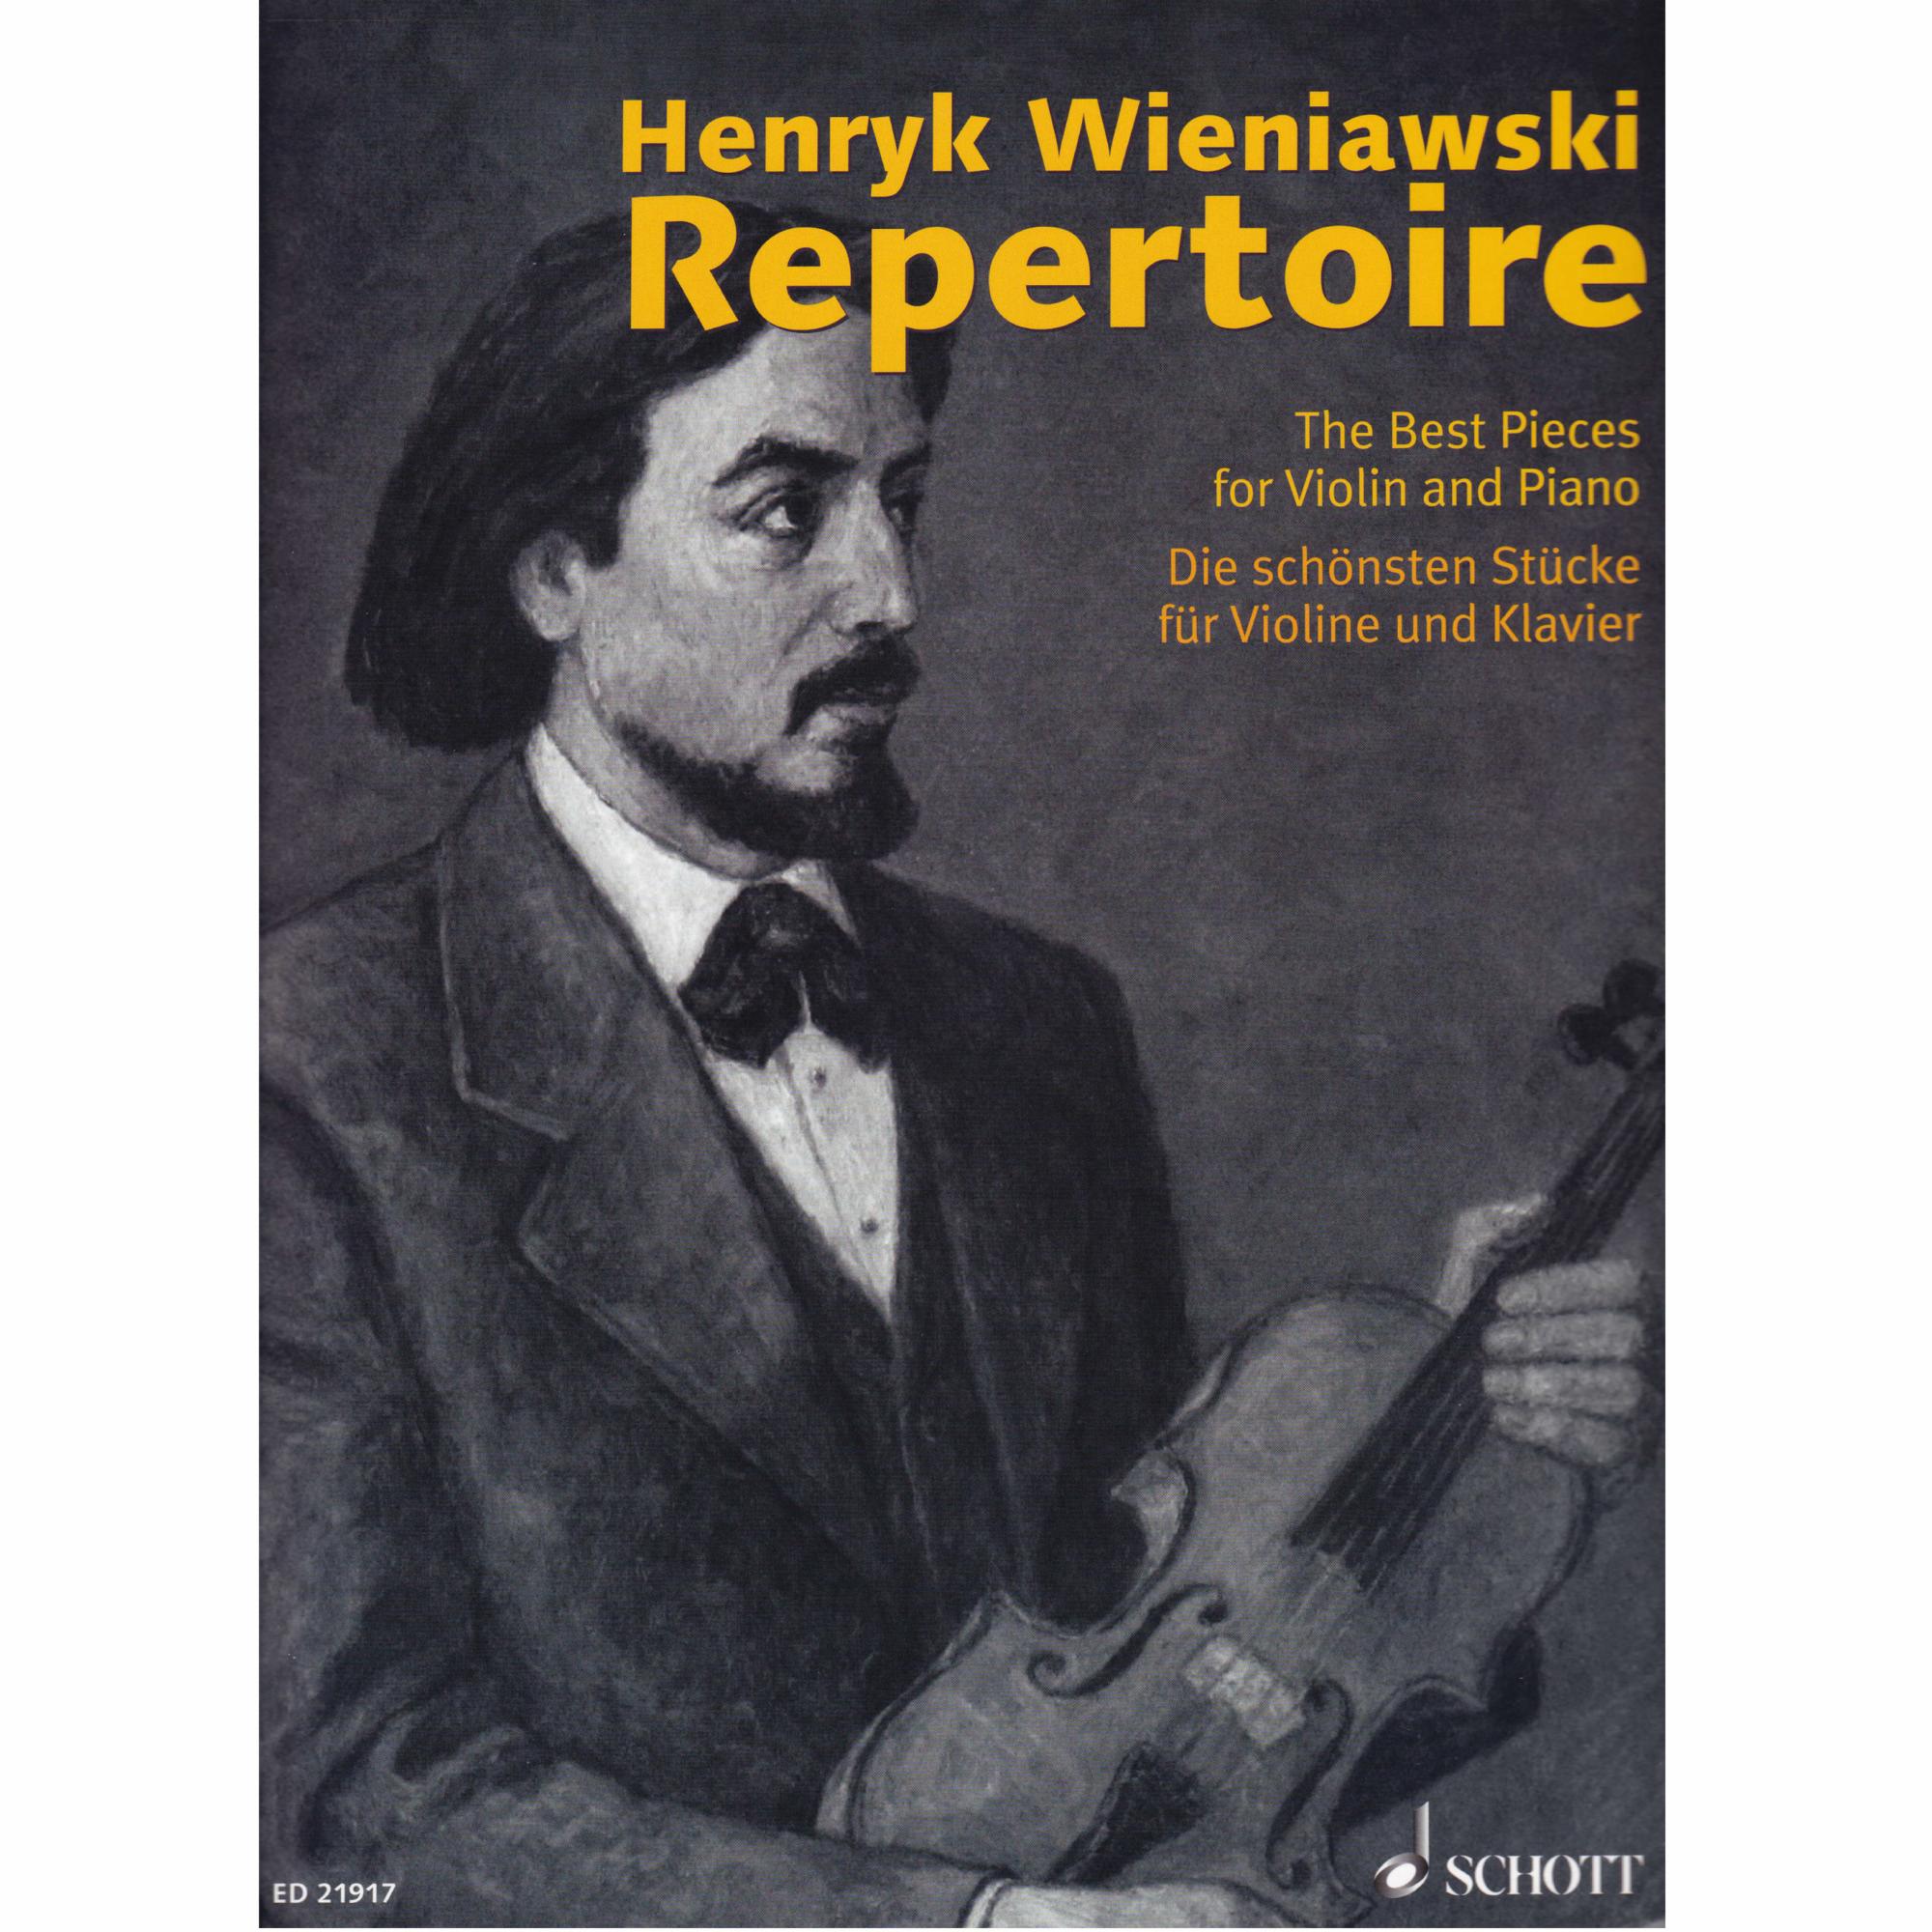 Henryk Wieniawski: The Best Pieces for Violin and Piano